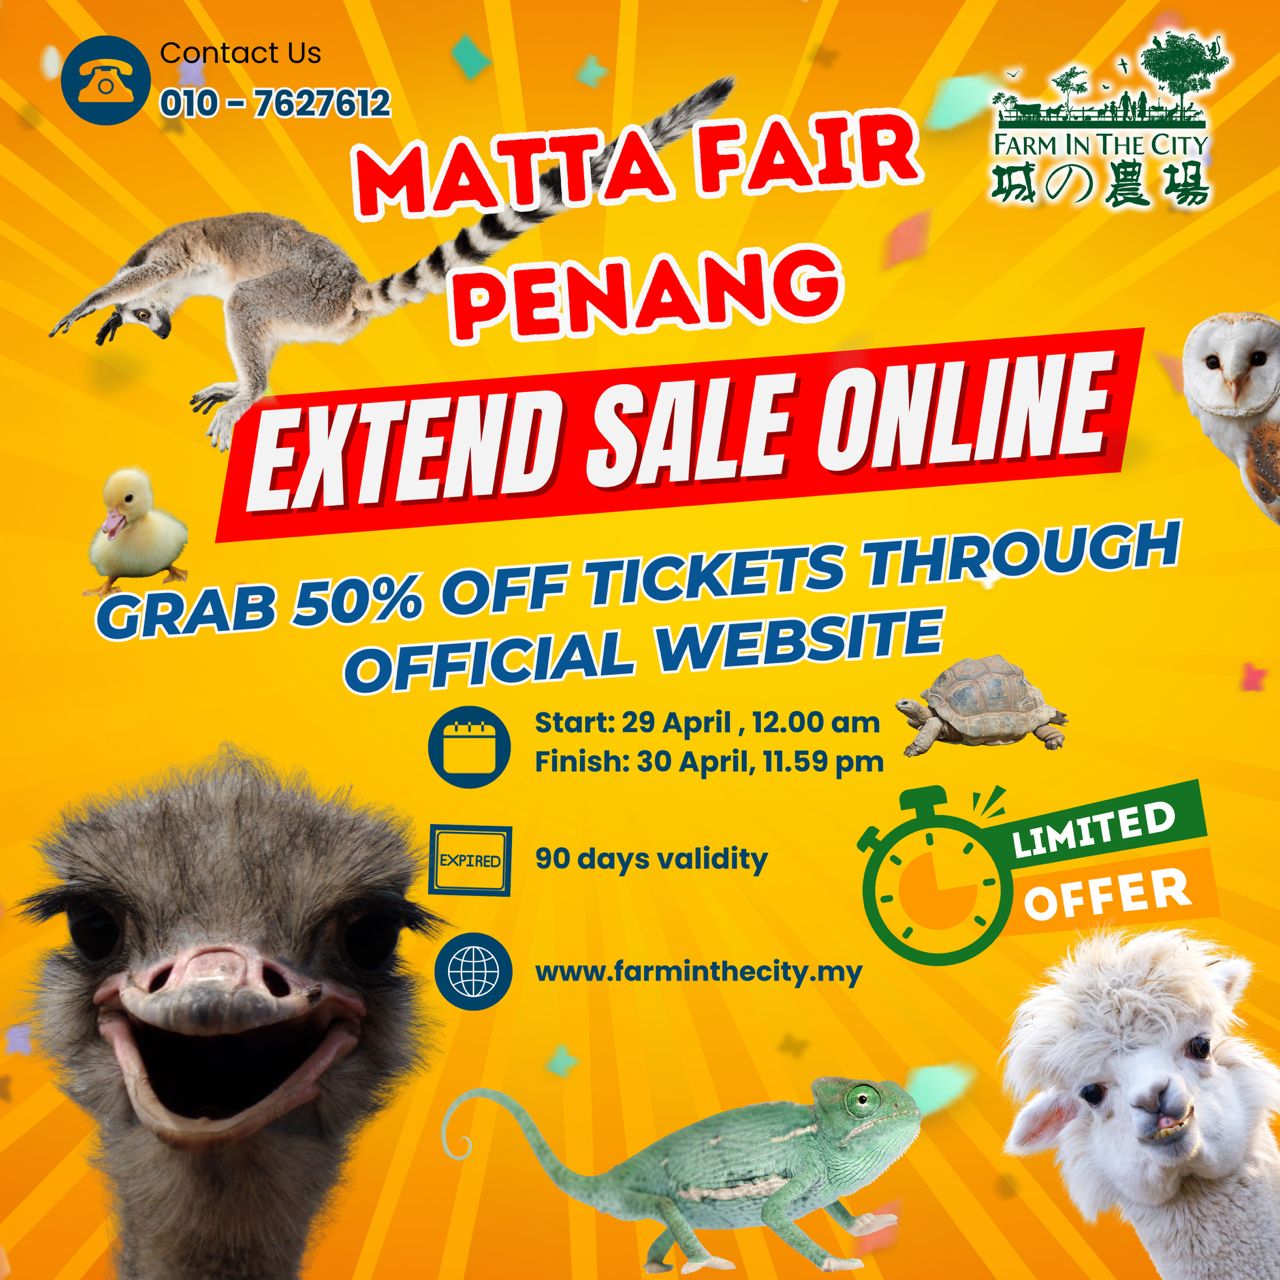 MATTA FAIR Penang Extended Limited Time Sale Online!